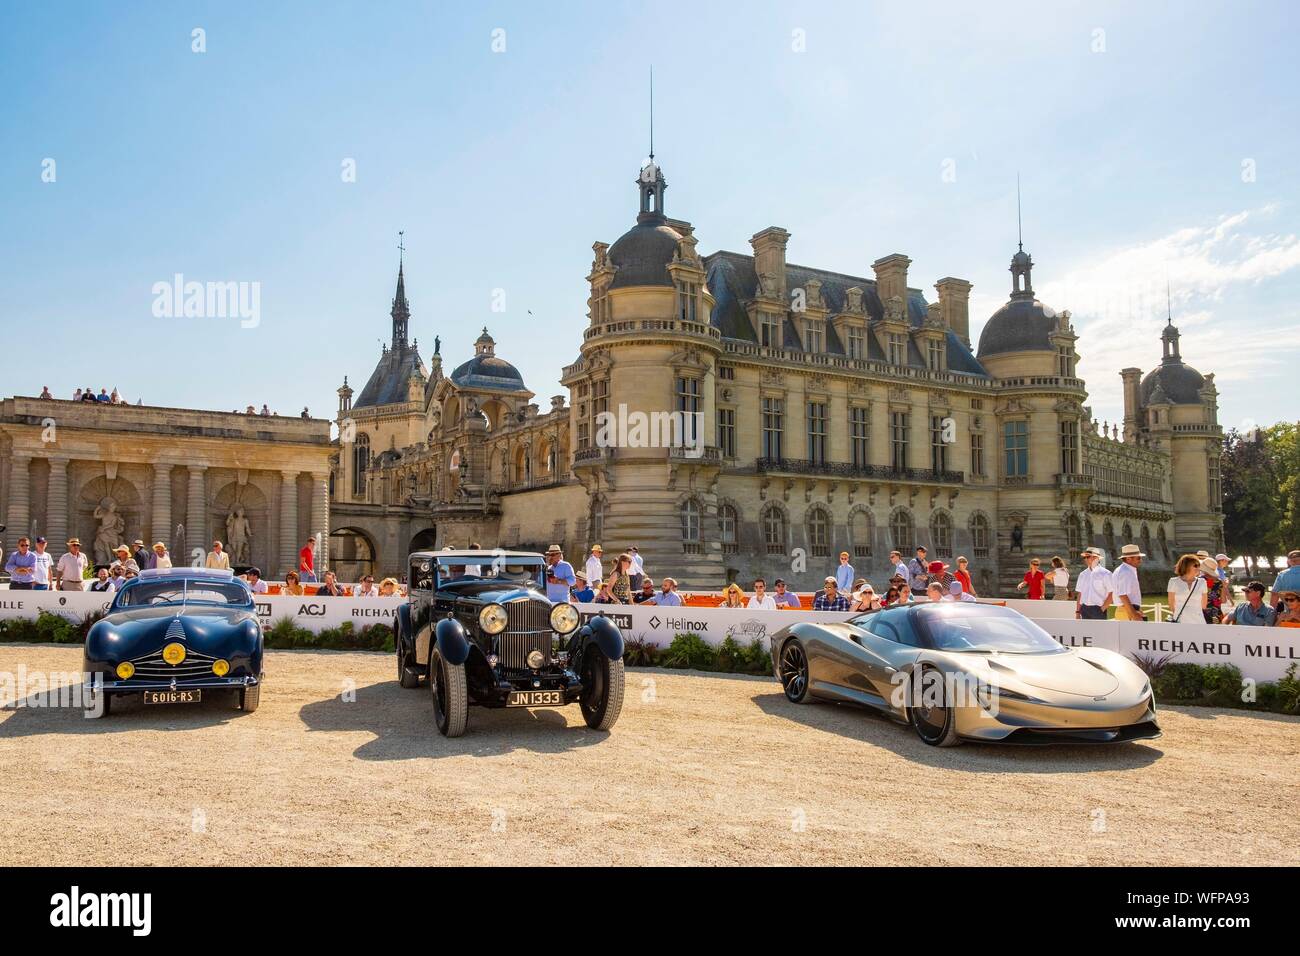 France, Oise, Chantilly, Chateau de Chantilly, 5th edition of Chantilly Arts & Elegance Richard Mille, a day devoted to vintage and collections cars, Best-of show (post-war), the Talbot Lago T26 Grand Sport Coupe Stock Photo